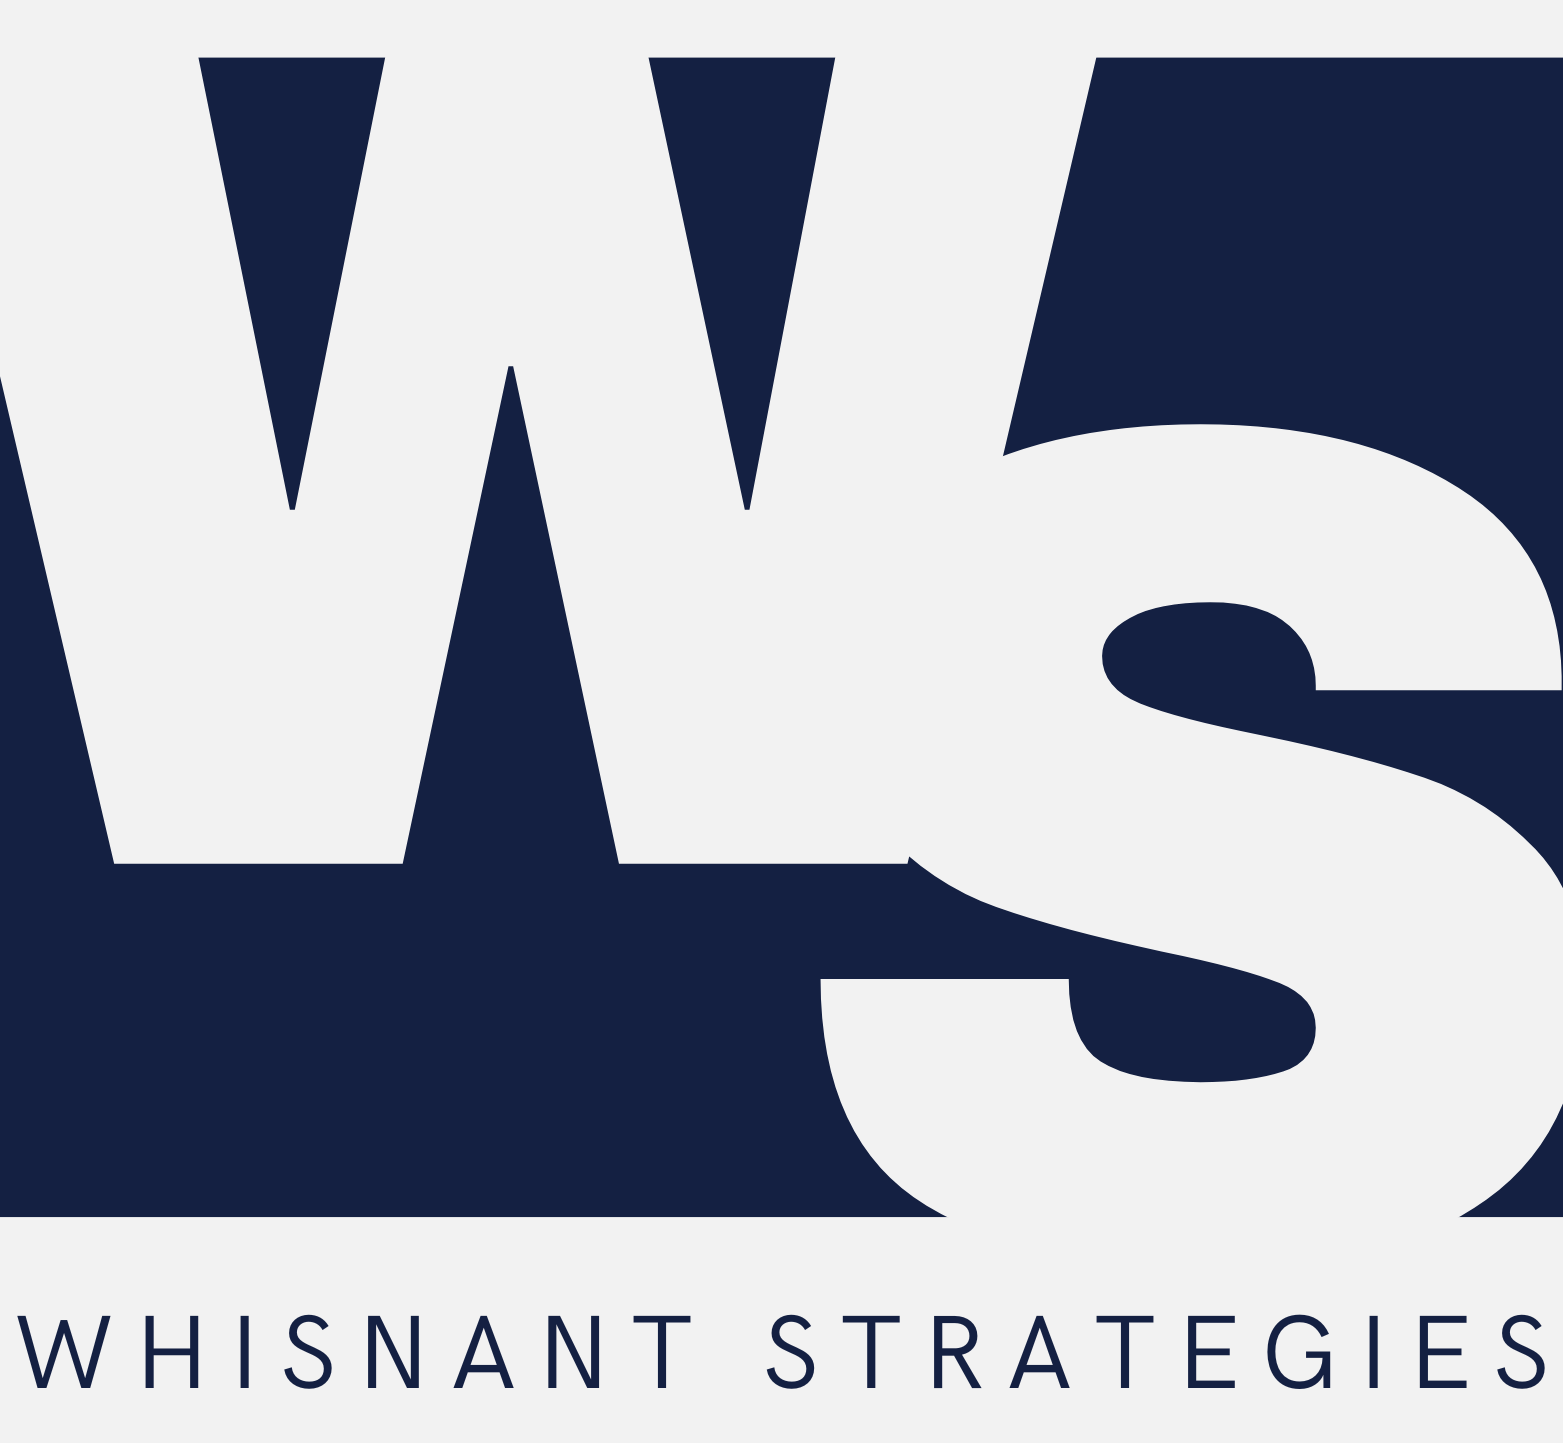 Whisnant Strategies